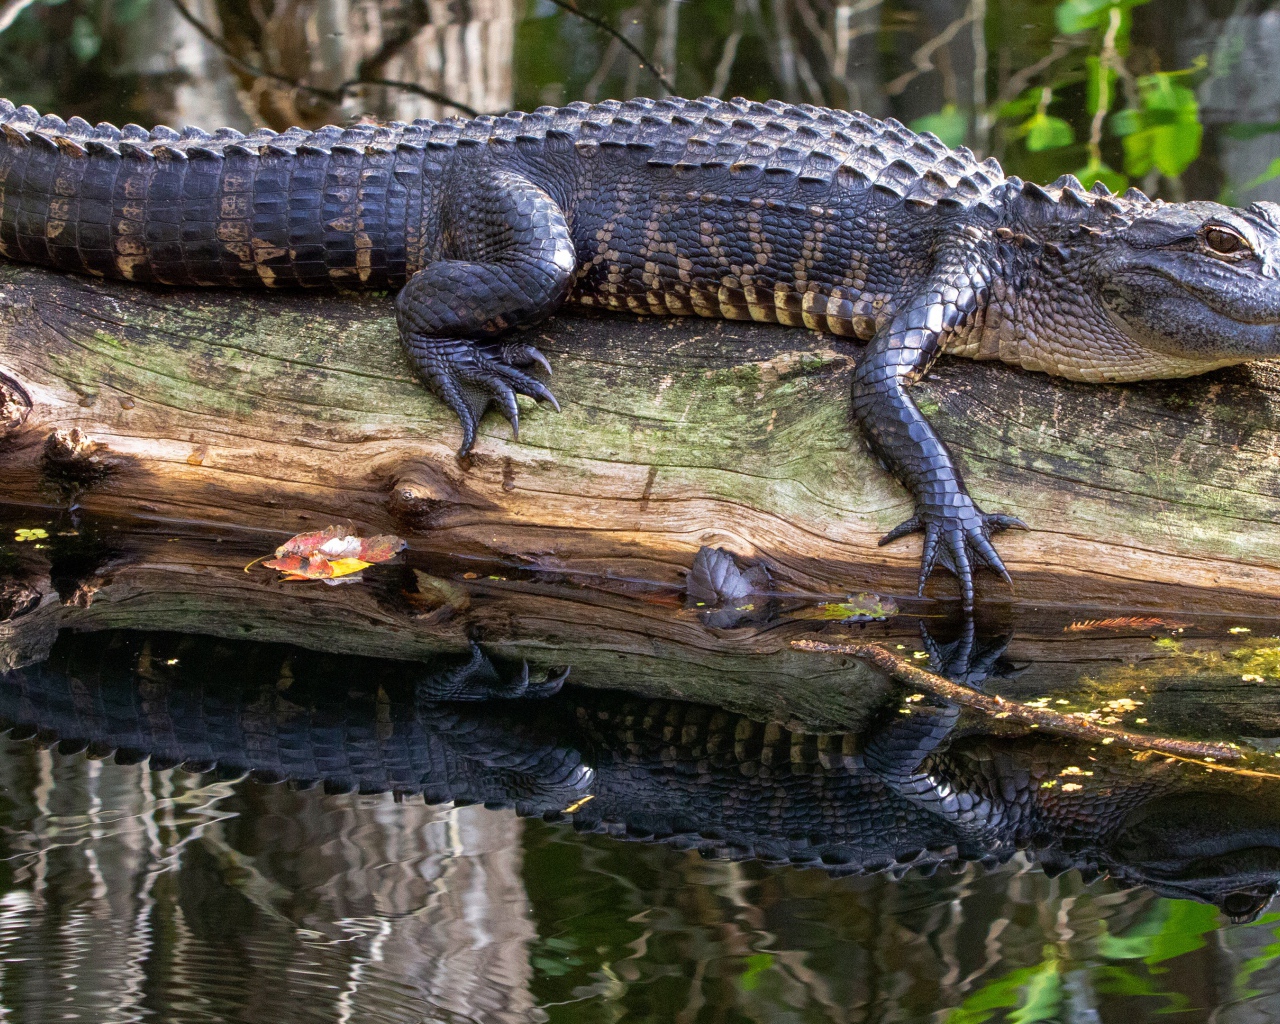 A large alligator lies on a dry tree in the water